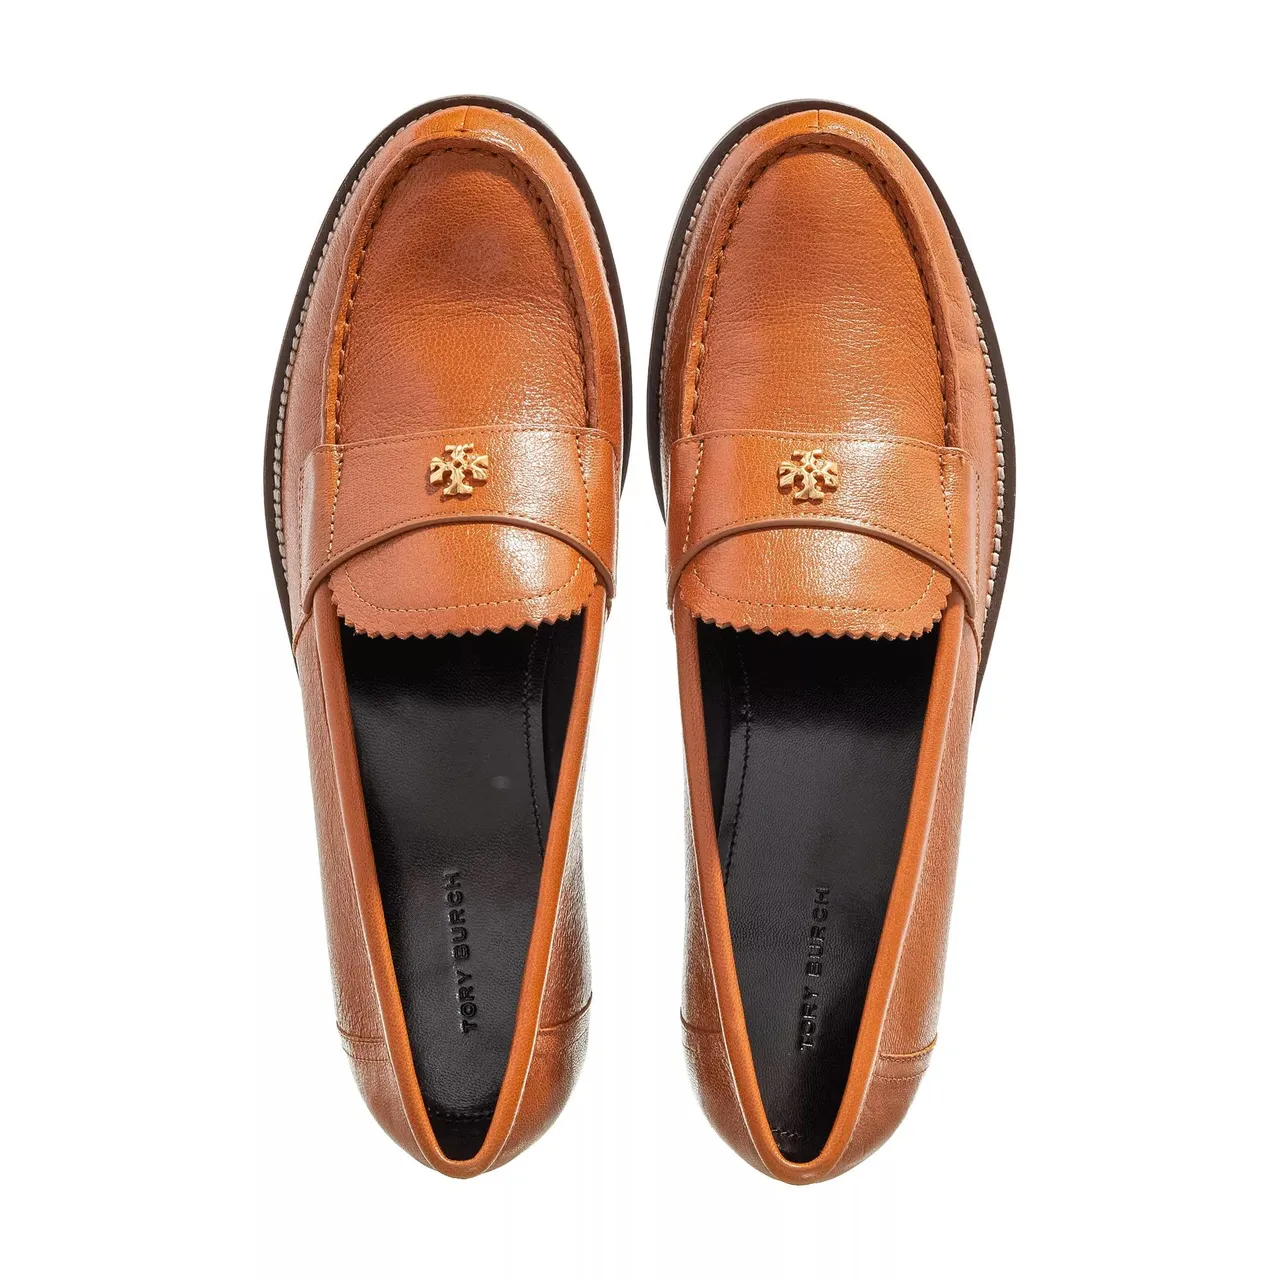 Tory Burch Loafers & Ballerinas - Perry Loafer